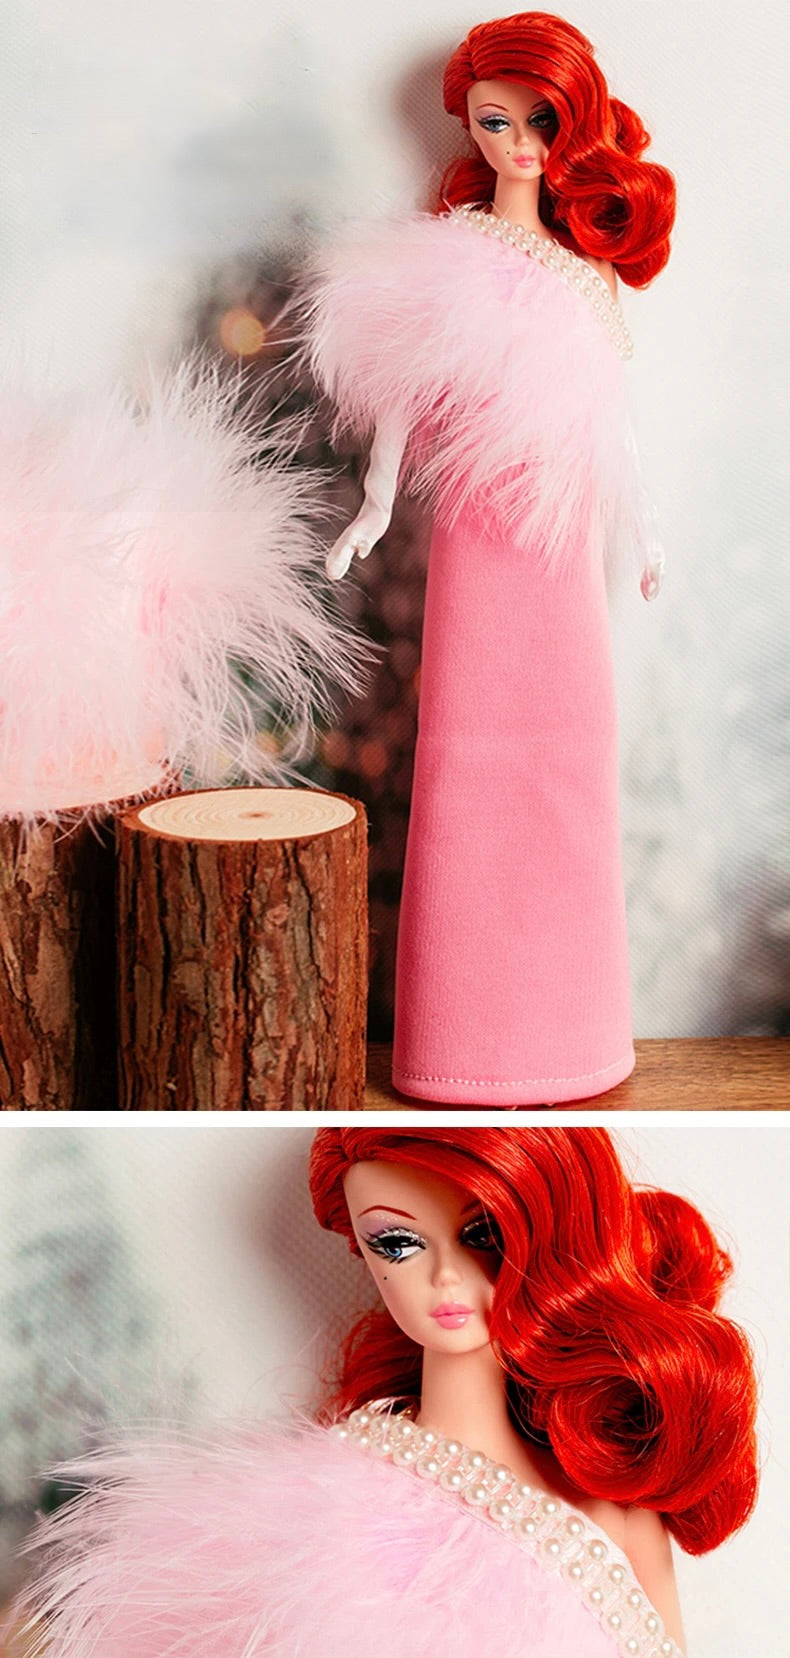 DOLLY® DOLL CLOTHES PINK FEATHER SHOWBIZ TUBE DRESS WITH PEARL TRIM FOR 12 inch 30 cm 1/6 scale fashion dolls